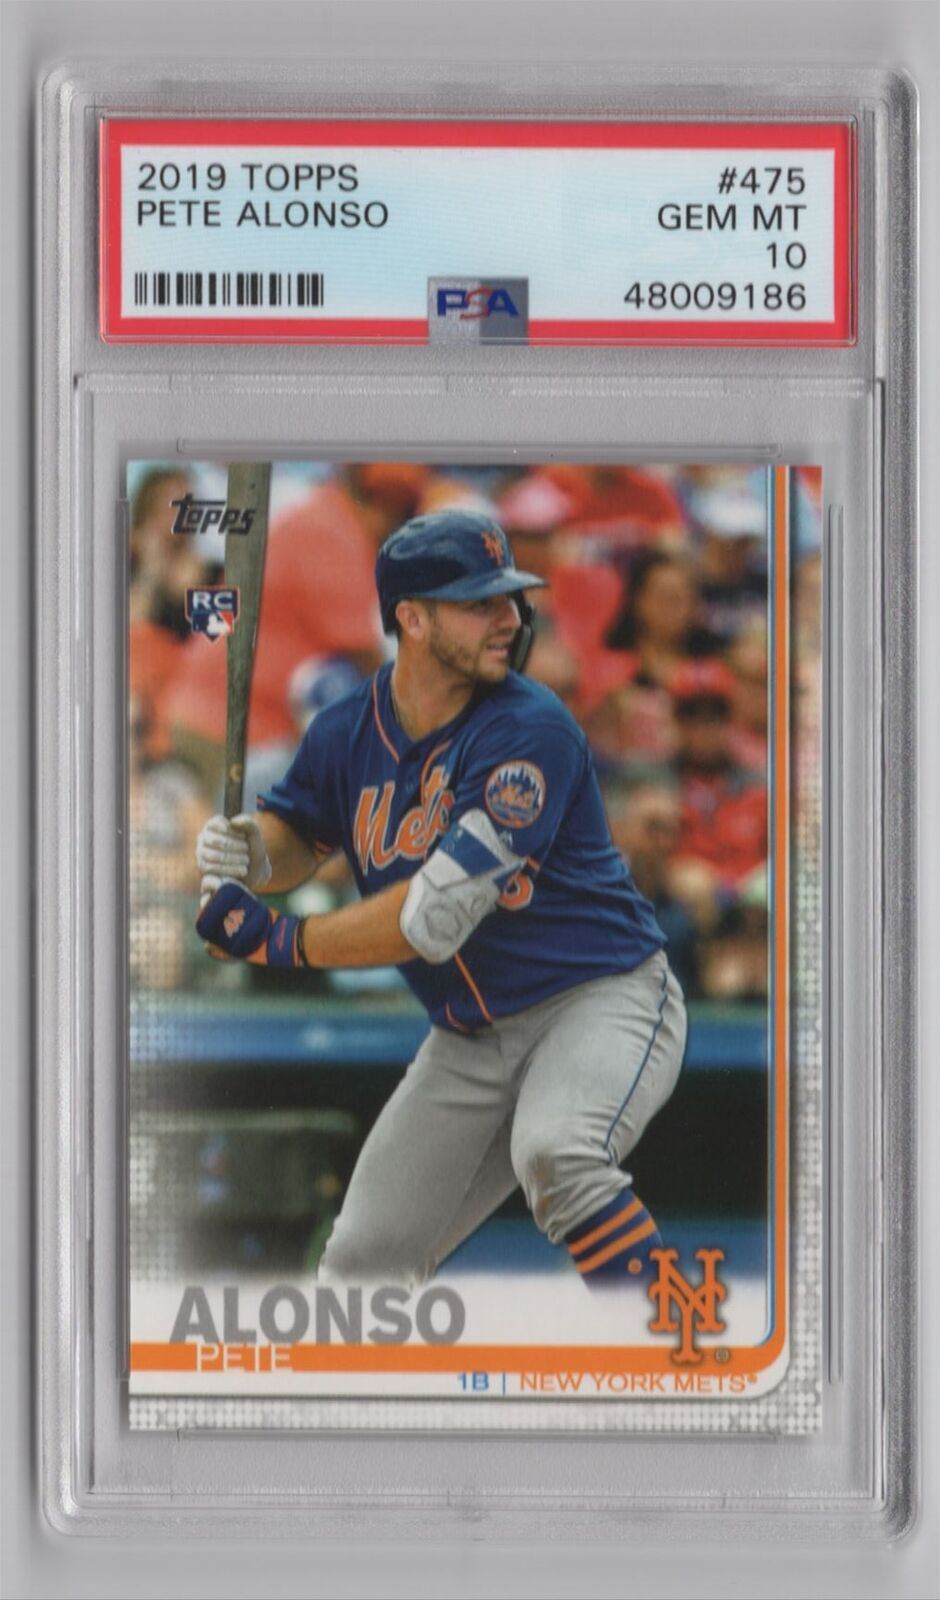 2019 Topps Pete Alonso RC PSA 10 New York Mets #475